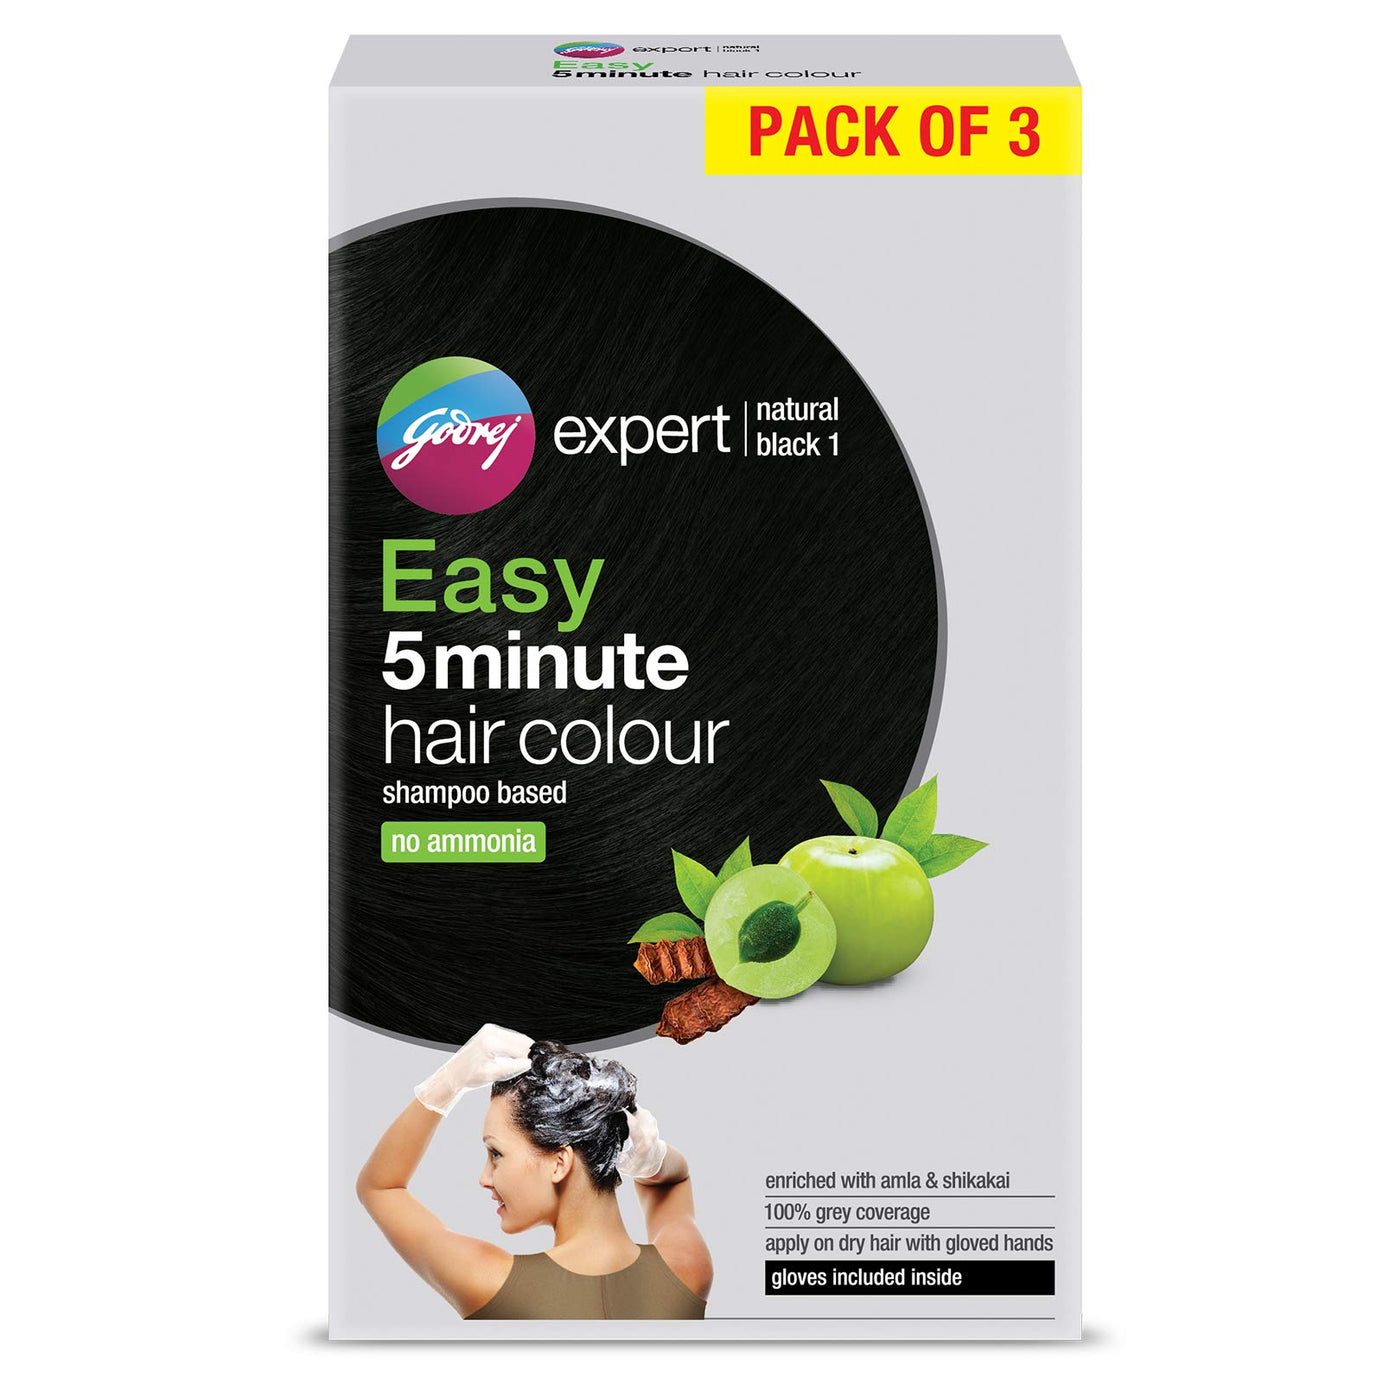 Shop Godrej Expert Easy 5 Minute Hair Colour - Natural Black 1 - Pack of 3 at price 120.00 from Godrej Online - Ayush Care